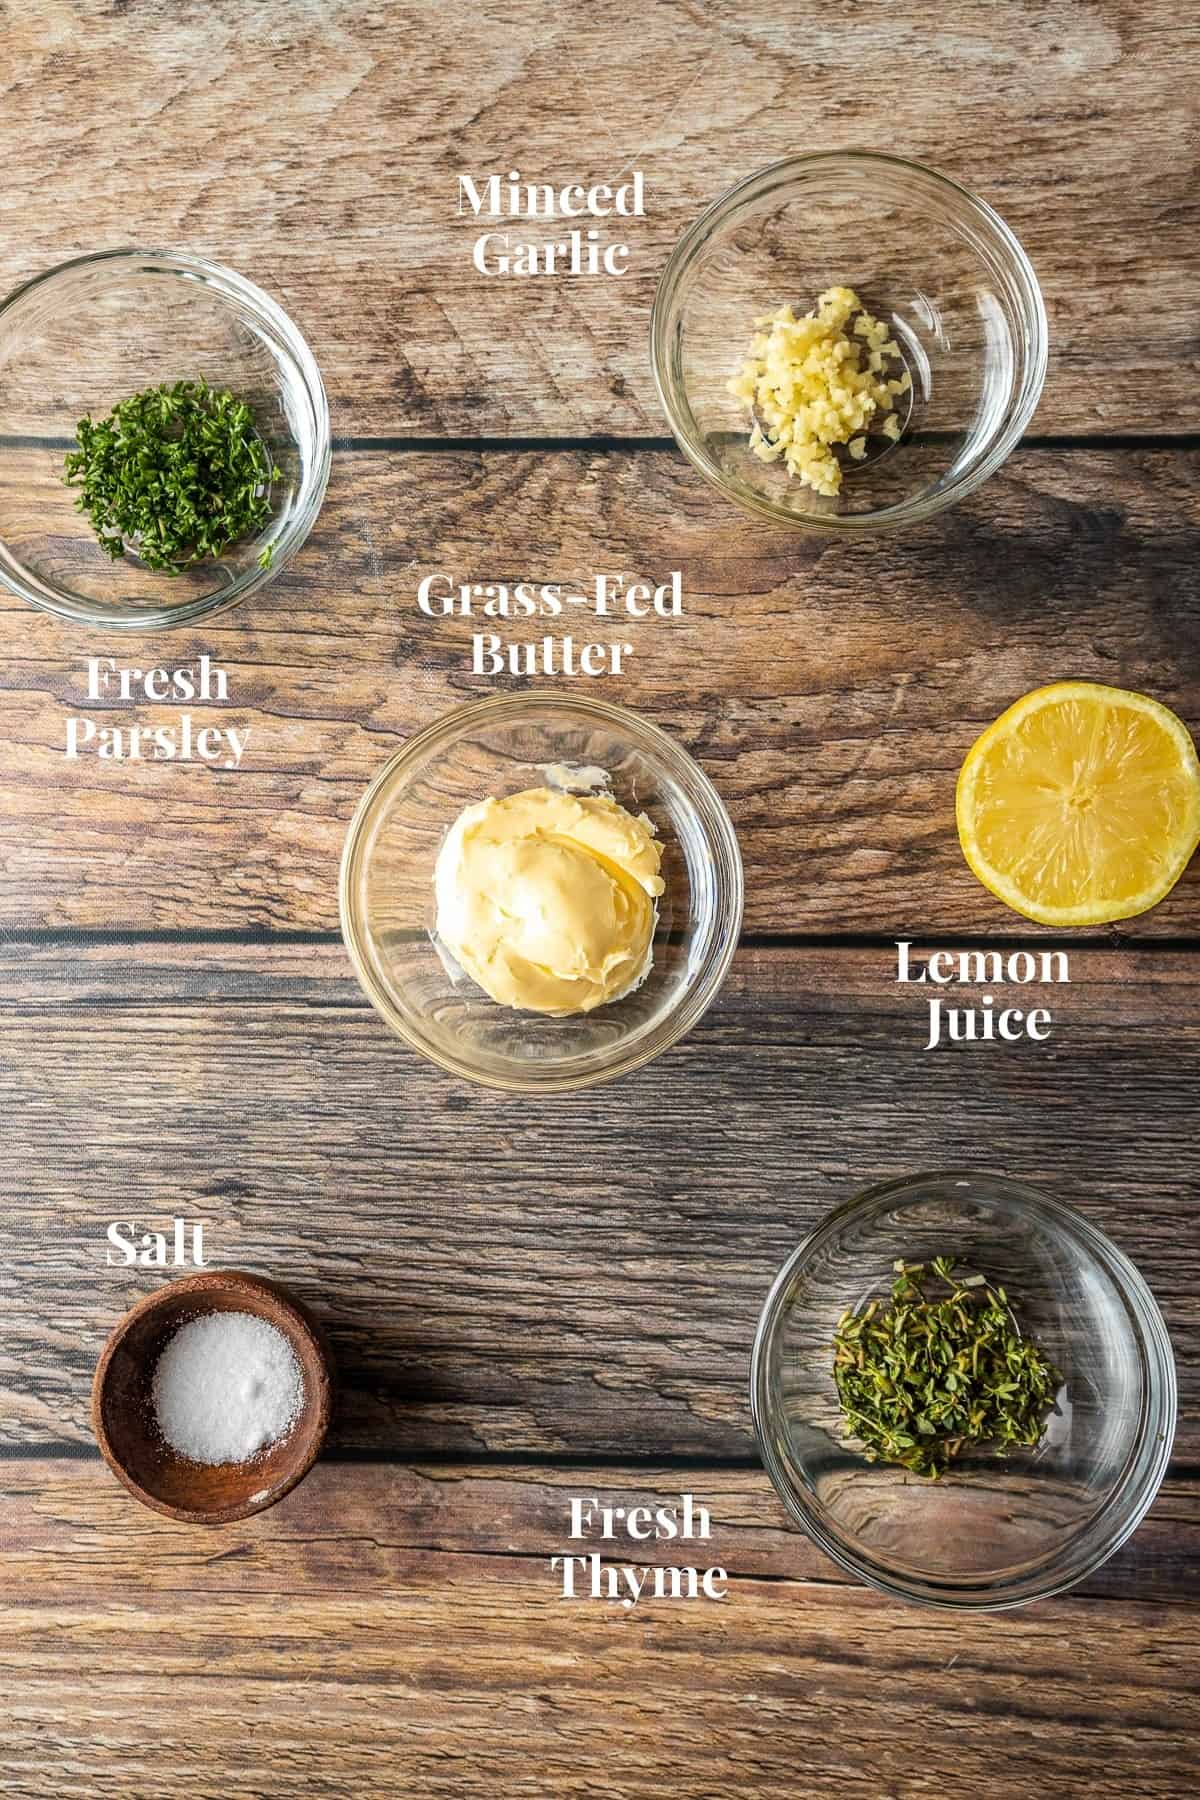 An overview shot of the ingredients needed for an herb and garlic butter compound on a wood background.